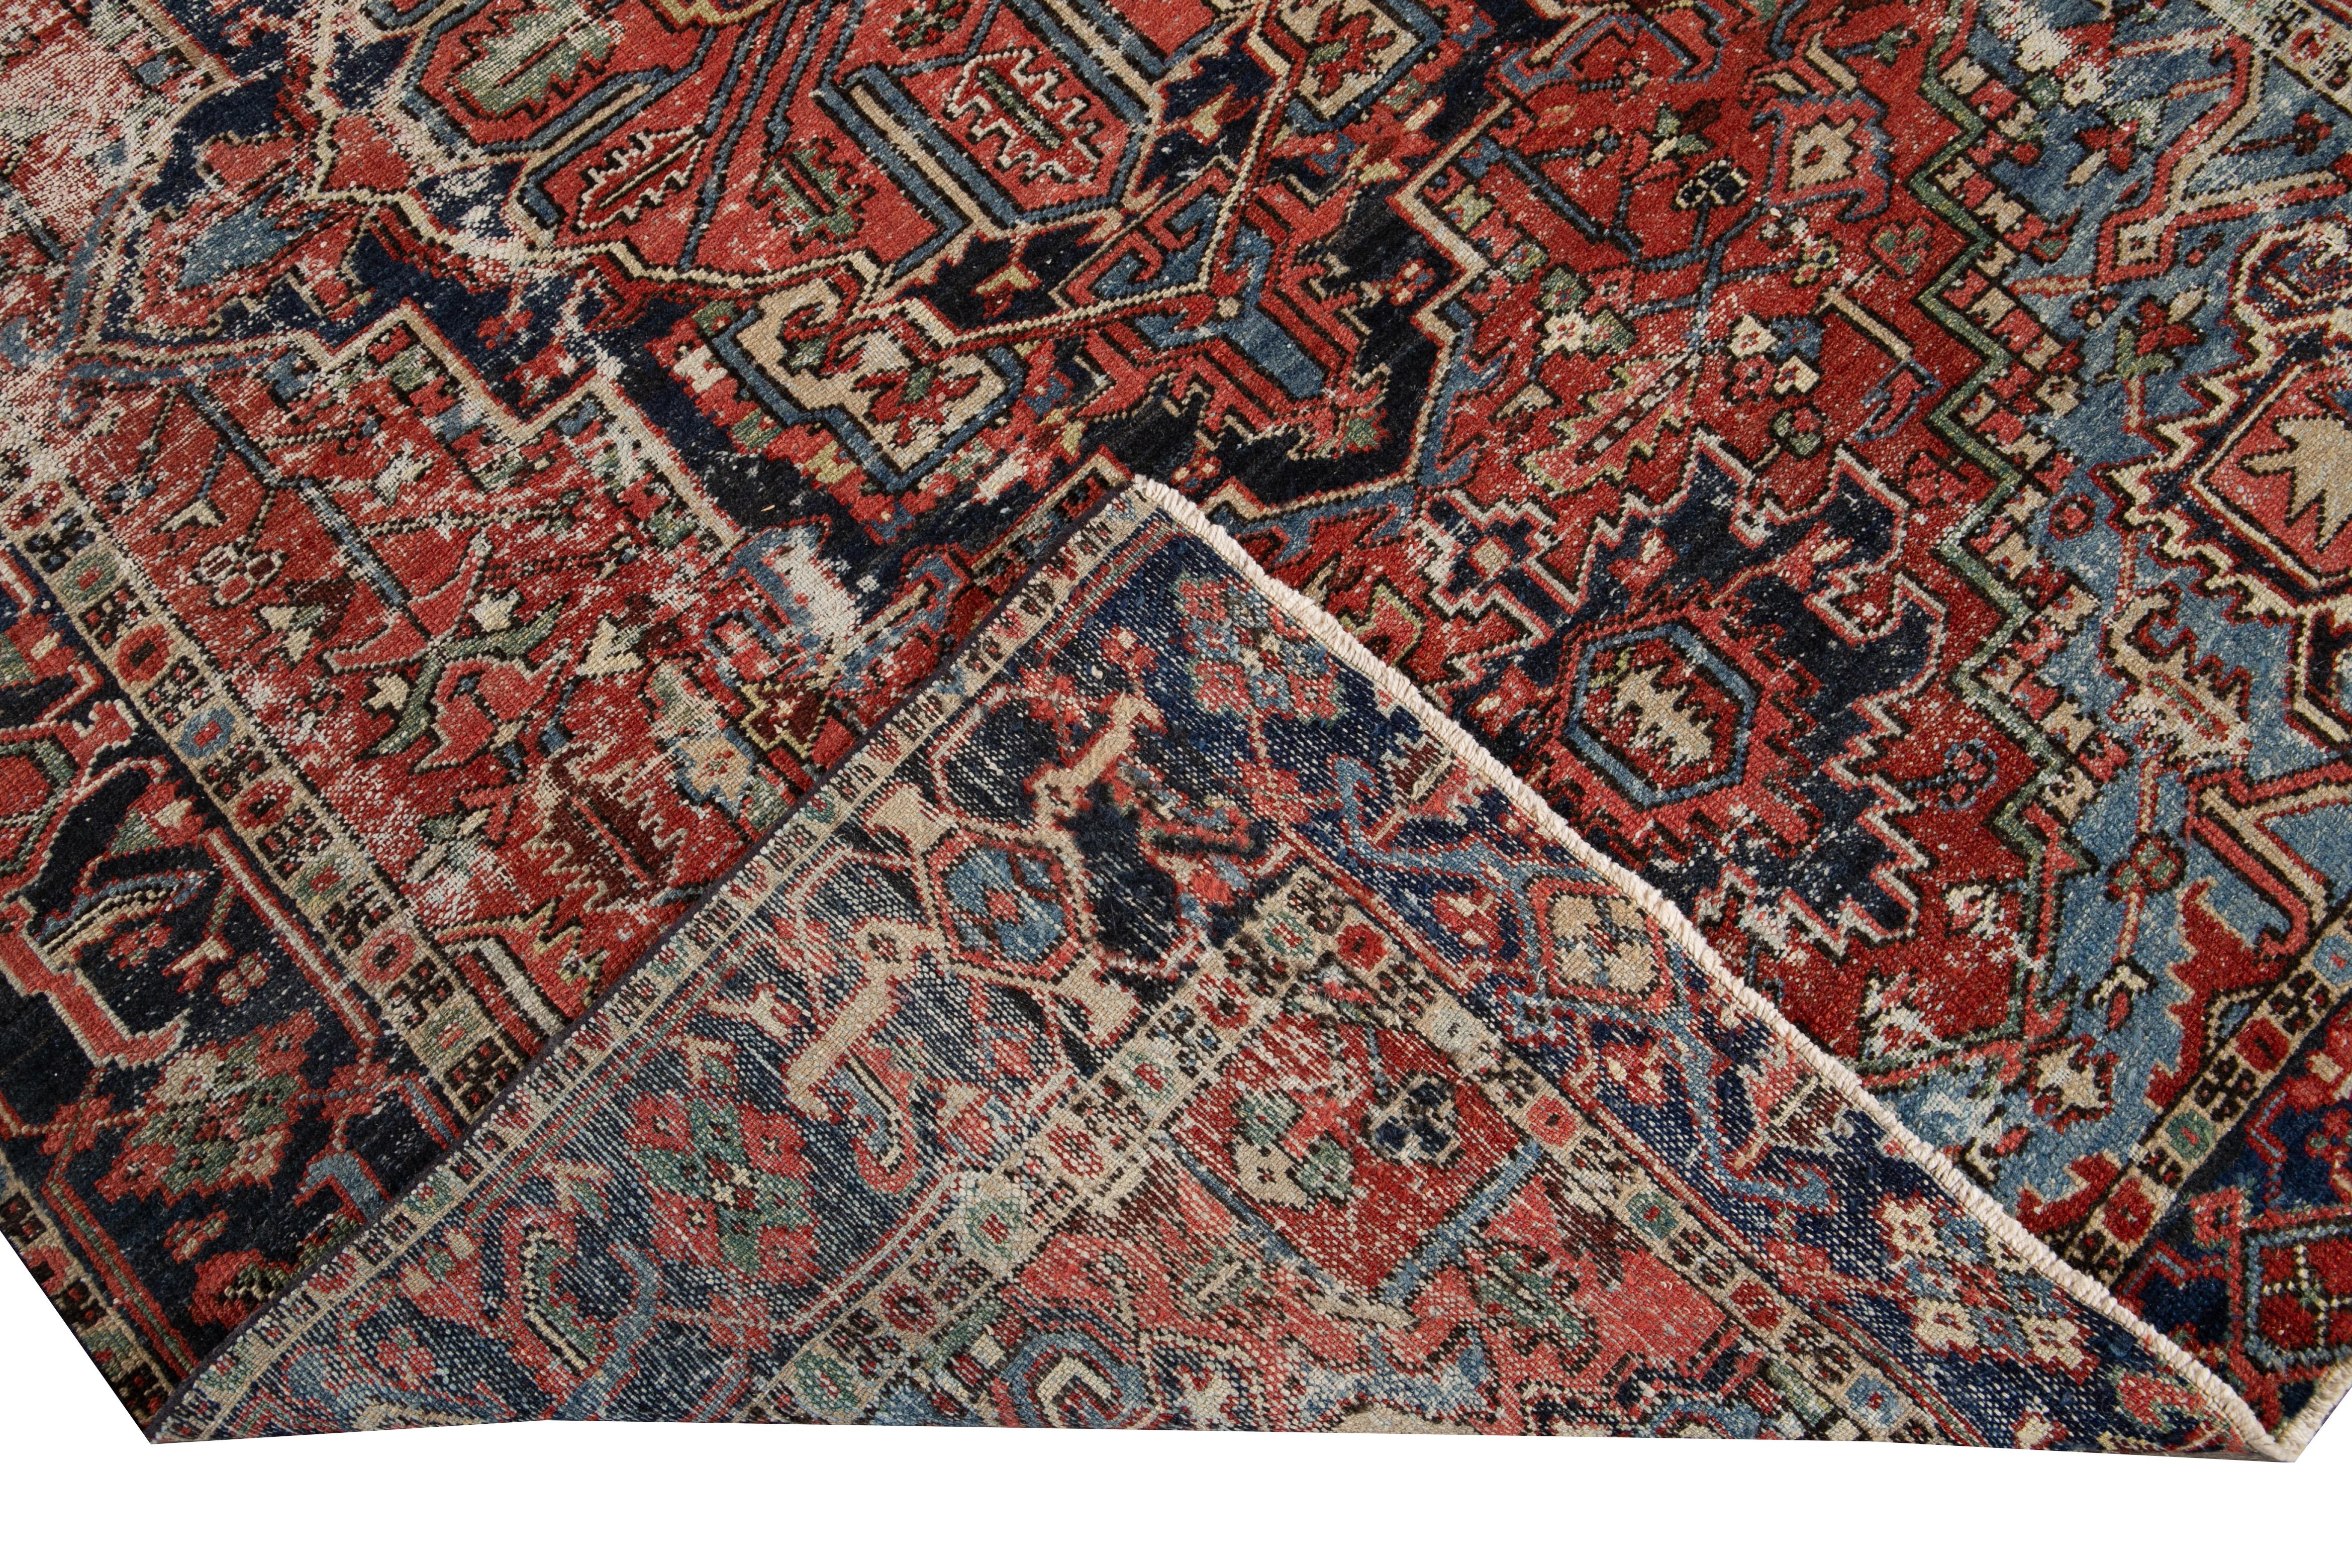 Beautiful antique Heriz hand-knotted wool rug with a red field. This Heriz rug has a dark blue frame and multi-color accents in a gorgeous all-over geometric medallion floral design.

This rug measures: 5'11